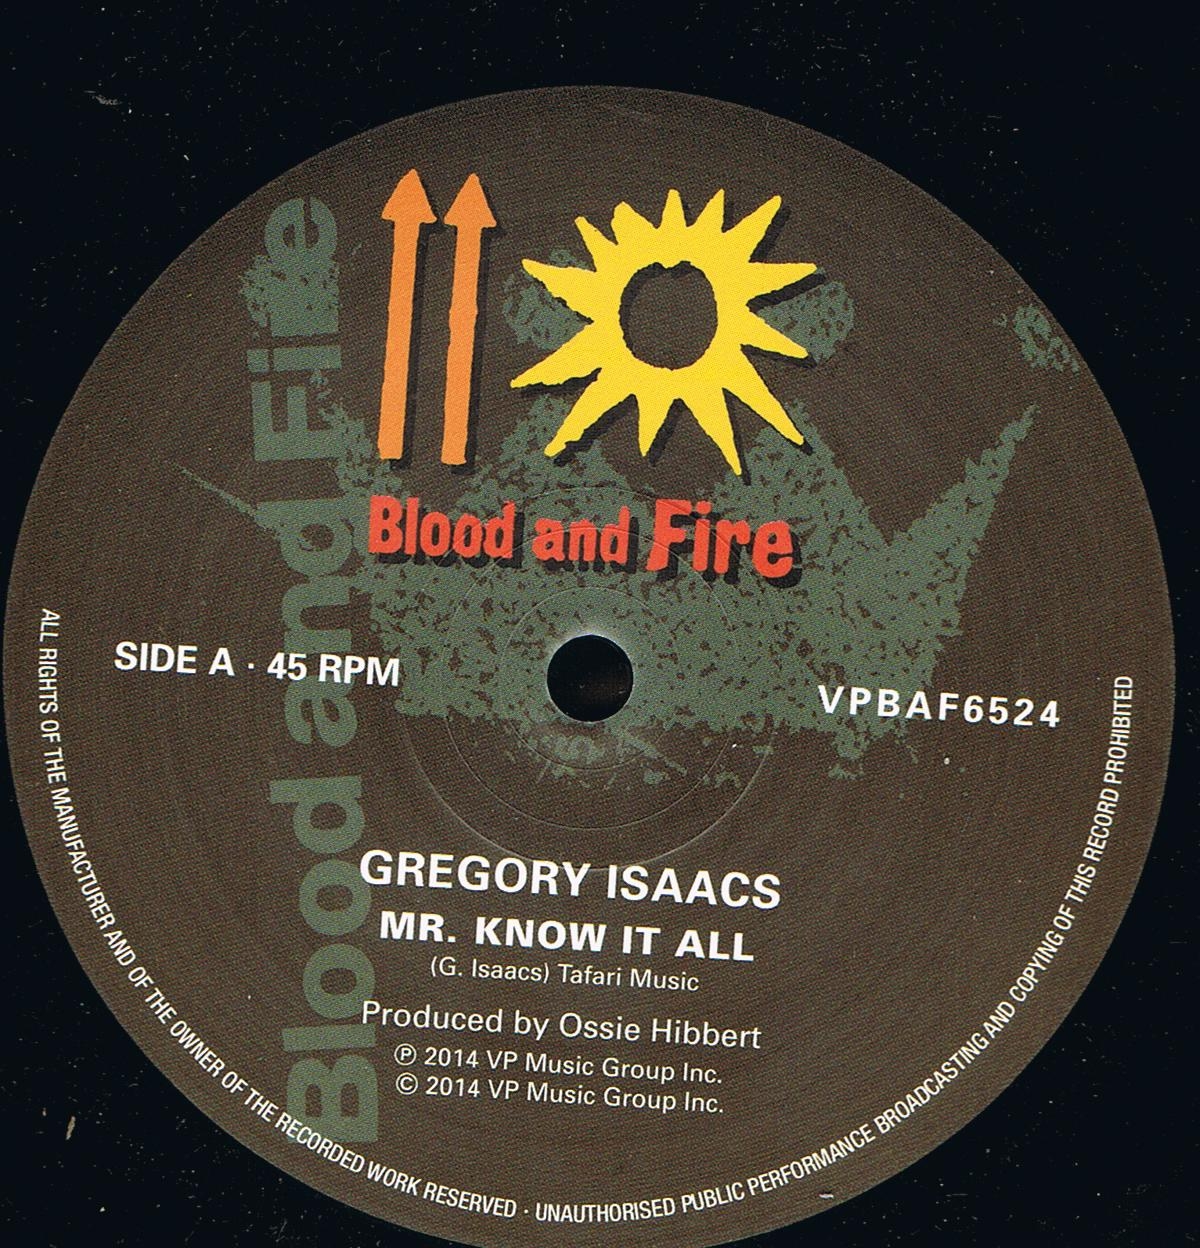 Gregory Isaacs - Mr. Know It All / Ossie Hibbert & The Revolutionaries - War Of The Stars (12")